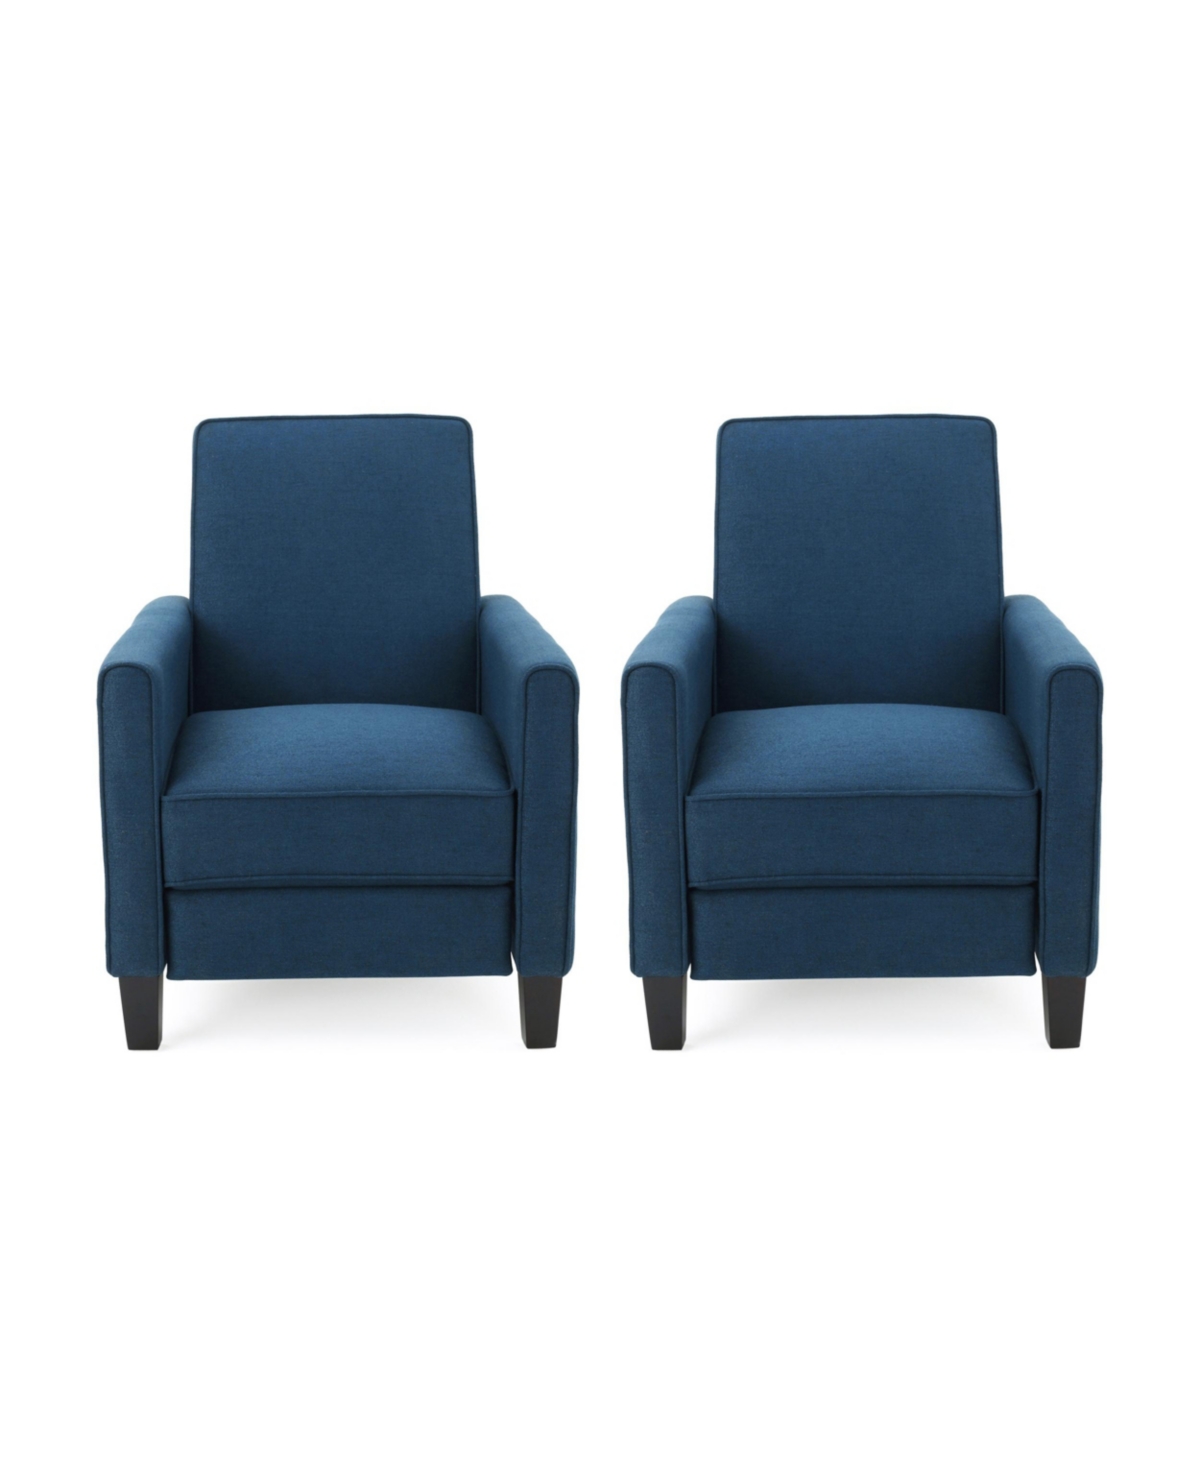 Noble House Darvis Contemporary Recliner Set, 2 Piece In Navy